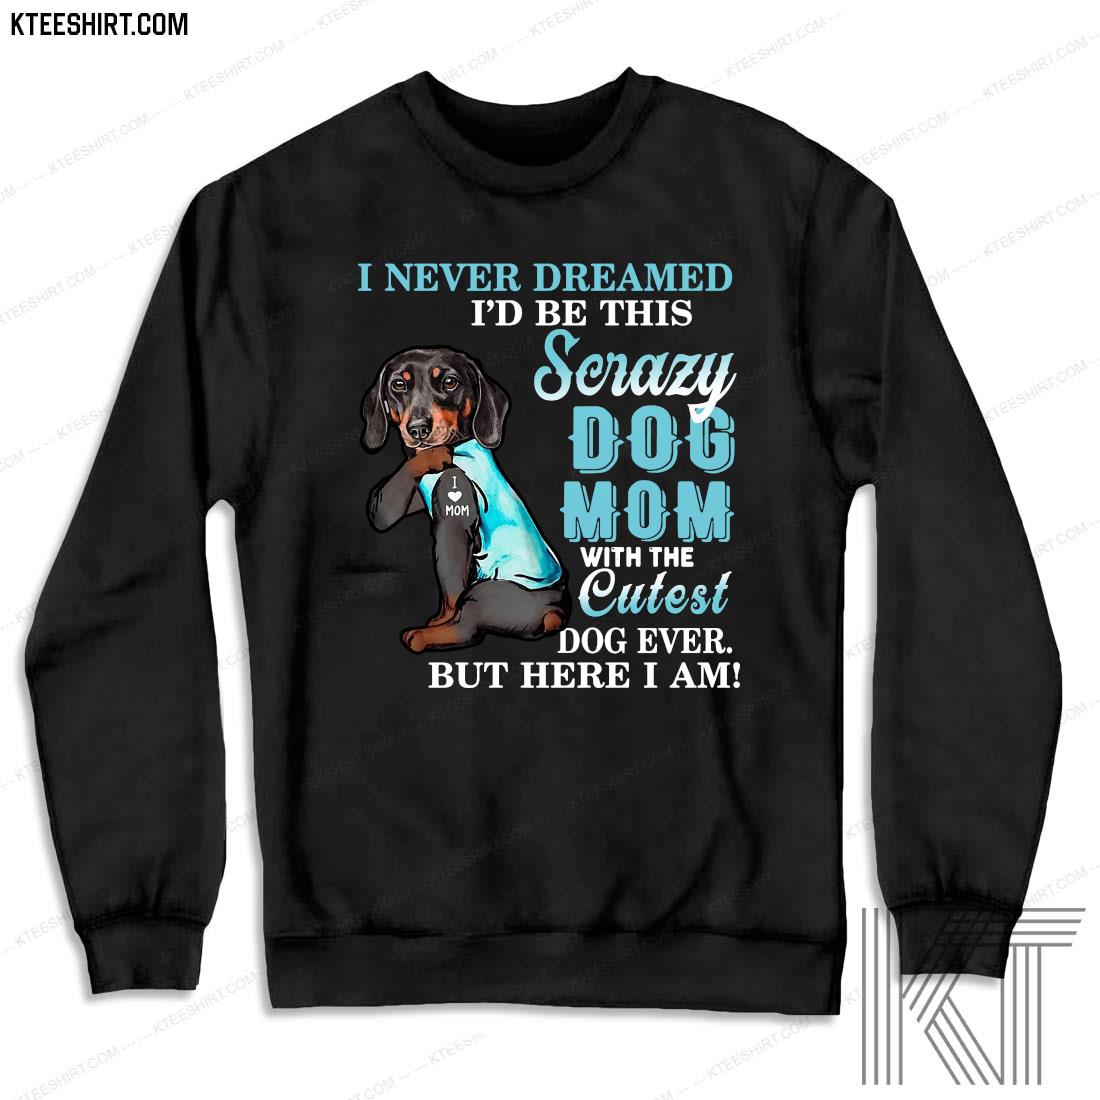 I am Loved by a Dachshund Dog Sweatshirt Also Dog T Shirt Available ------